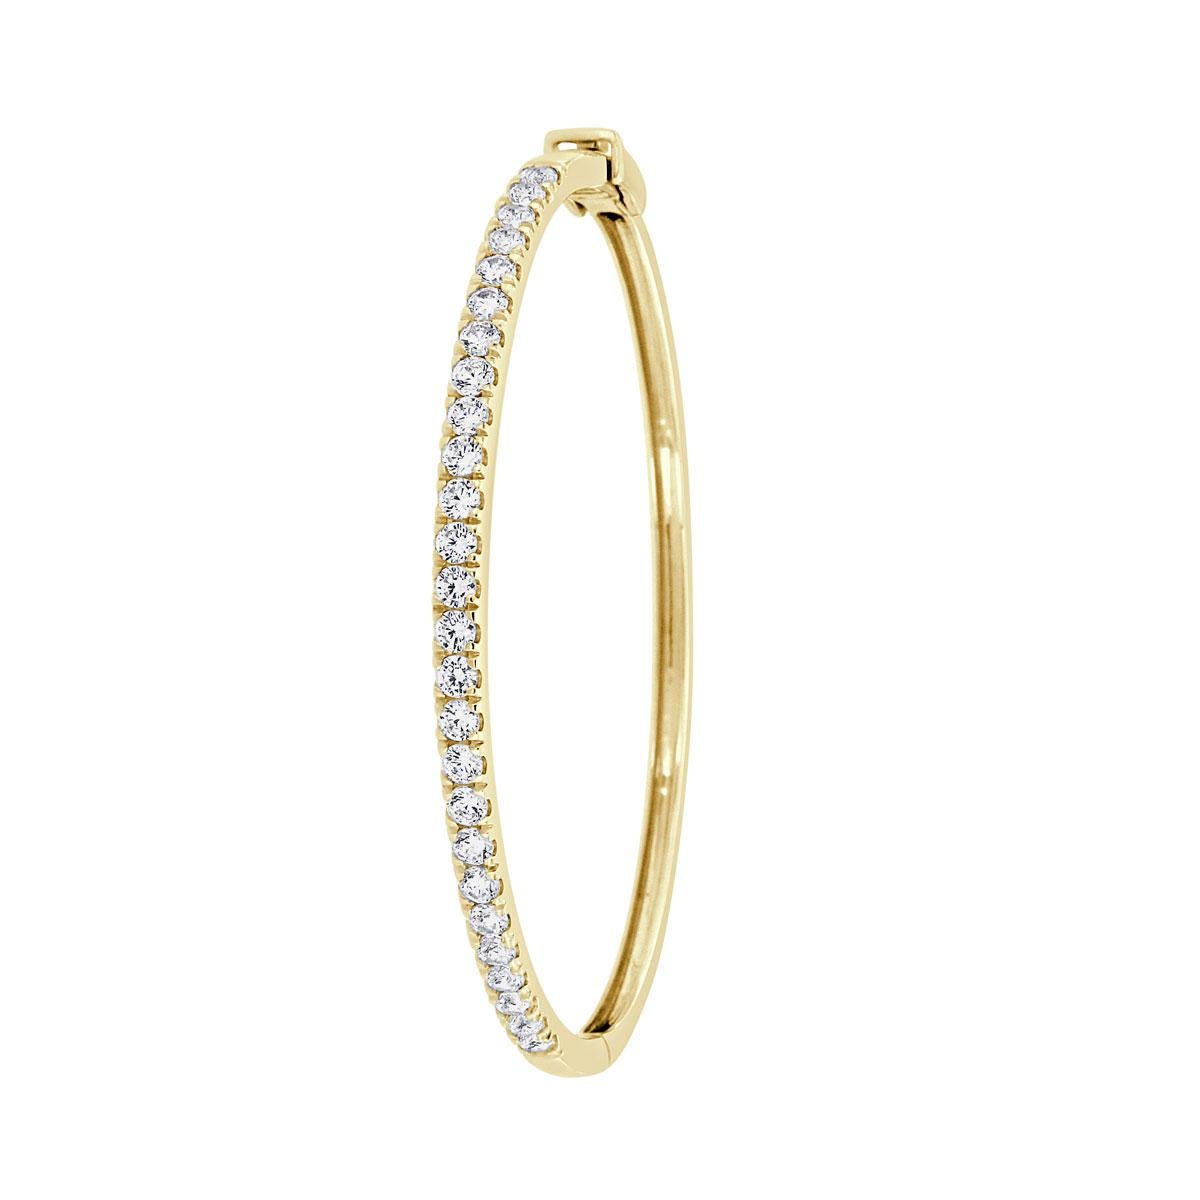 This classic bangle features round brilliant diamonds micro-prong -set for maximum brilliance. Experience the difference!

Product details: 

Center Gemstone Type: NATURAL DIAMOND
Center Gemstone Color: WHITE
Center Gemstone Shape: ROUND
Center